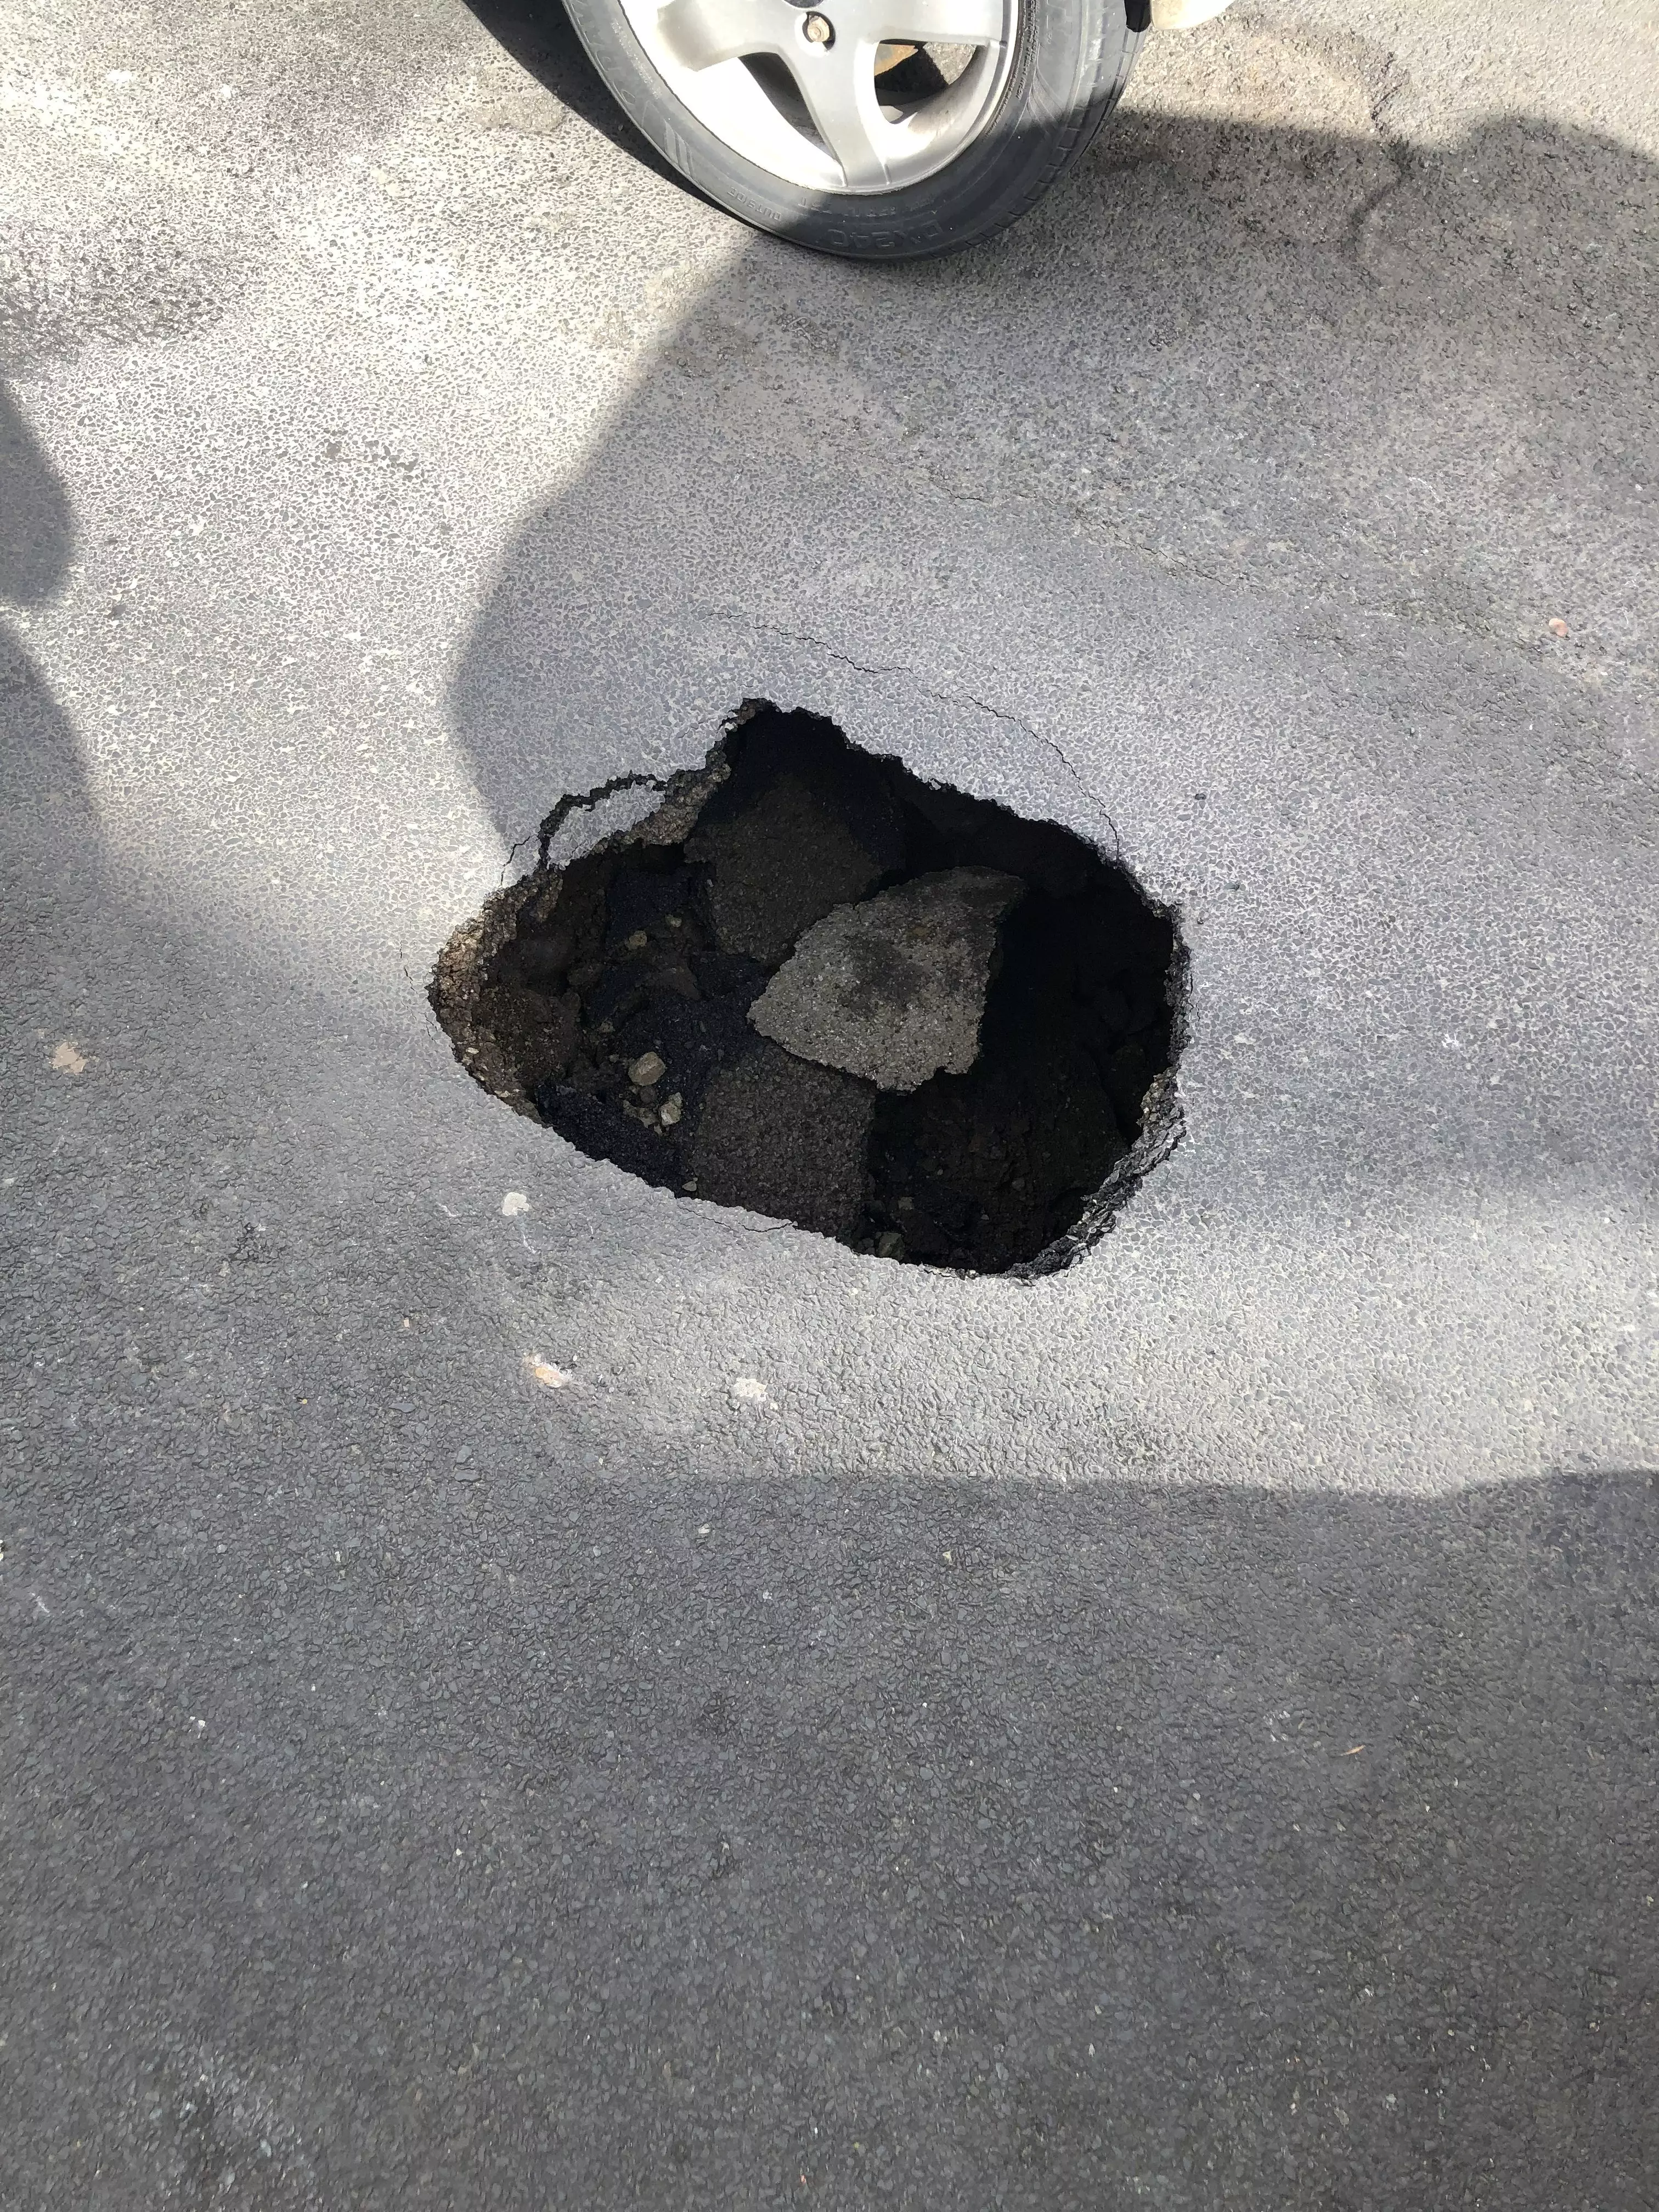 The huge hole opened up following recent work on the road.